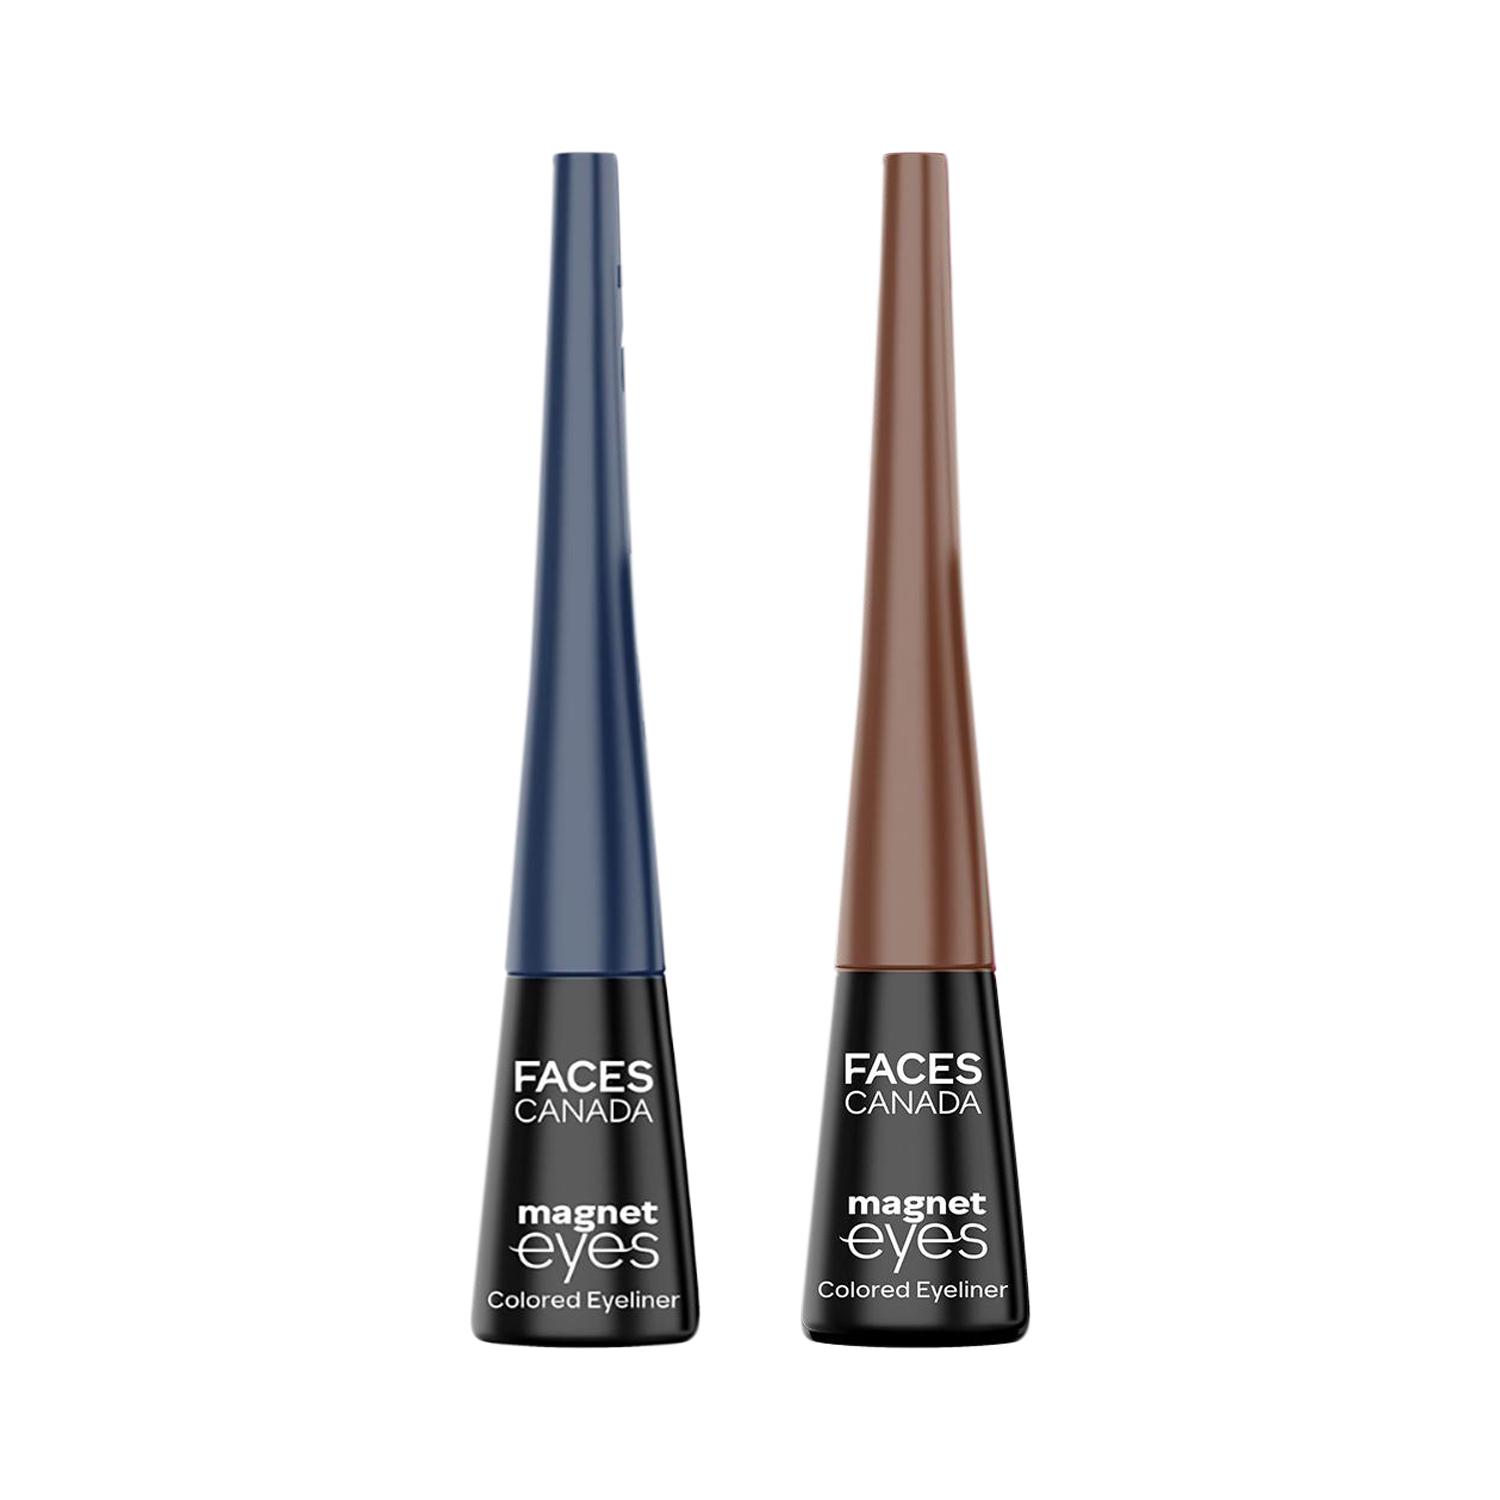 Faces Canada | Faces Canada Magneteyes Color Eyeliners Combo - Dazzling Blue and Powerful Brown (Pack of 2)